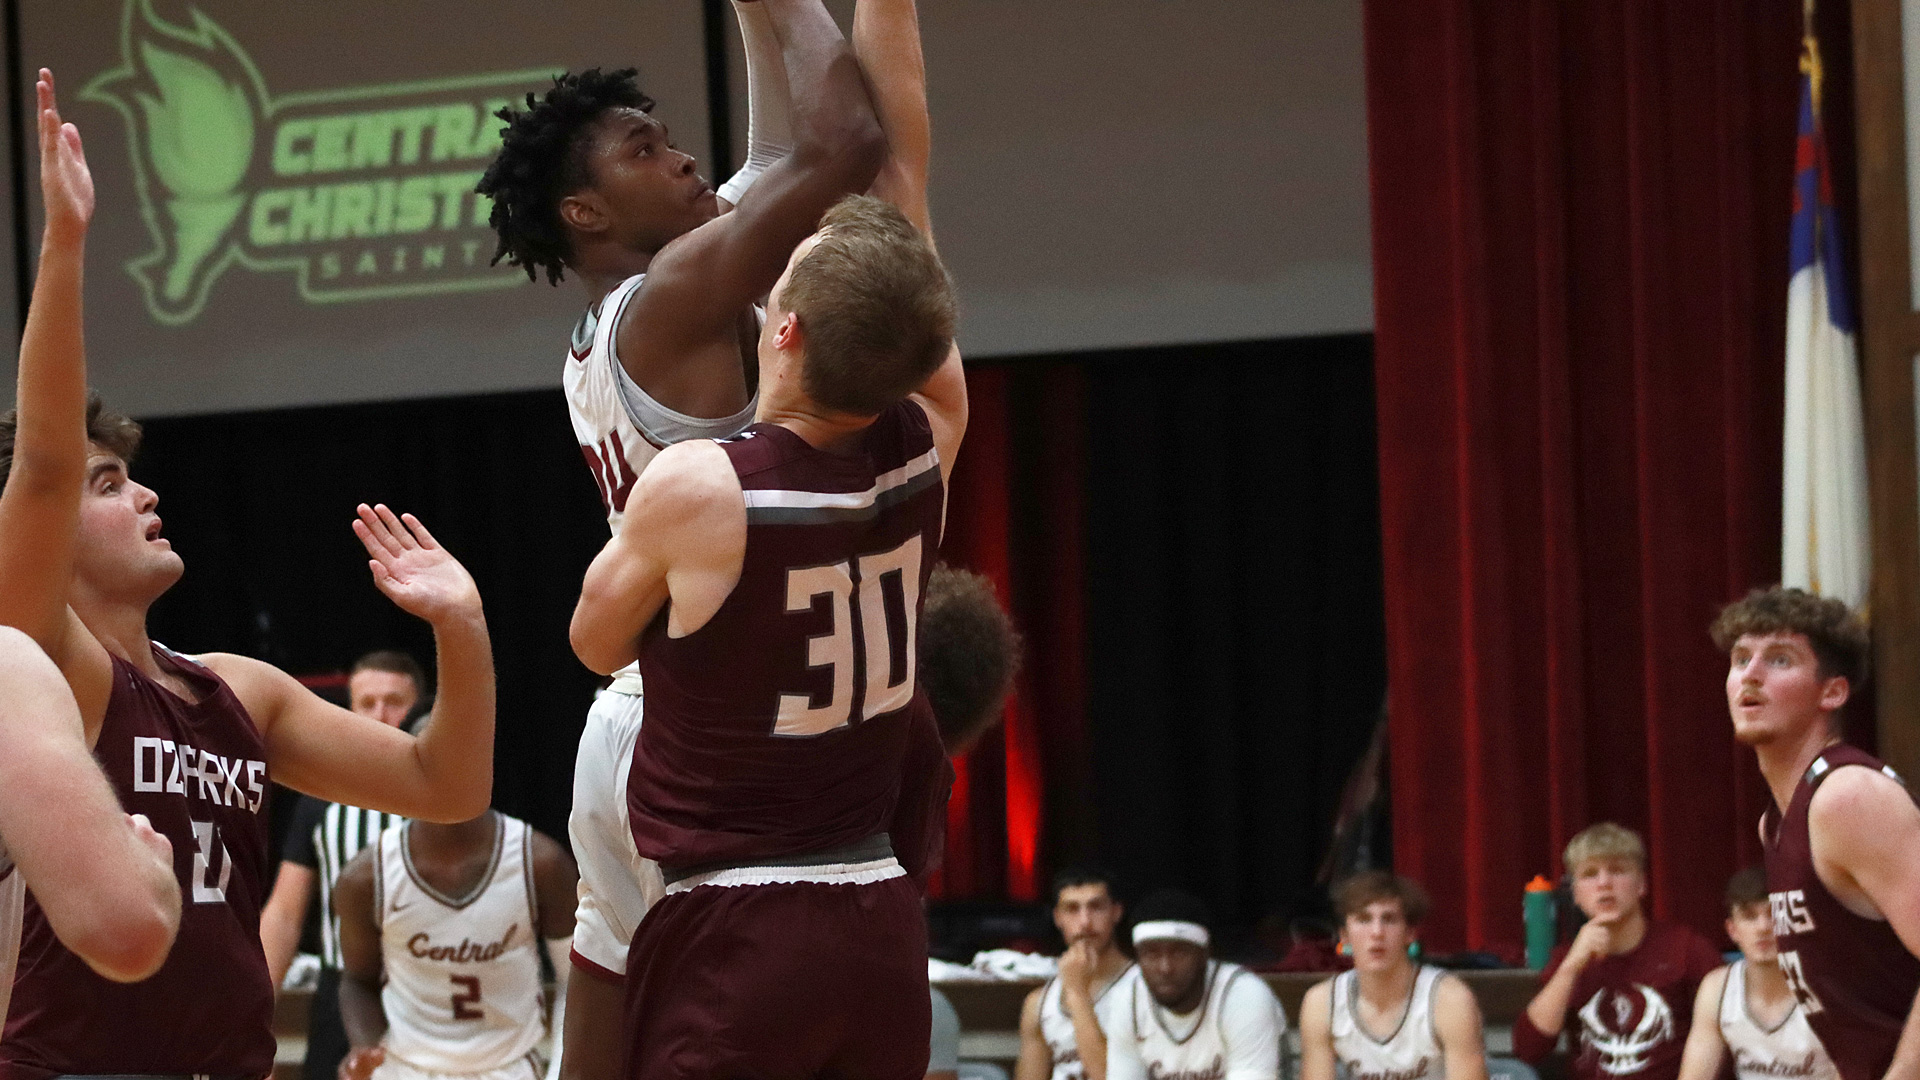 CCCB's Quincy James, Jr., drives to the basket during the Saints' 67-65 loss to College of the Ozarks on Tuesday. James finished the game with a game-high 20 points.